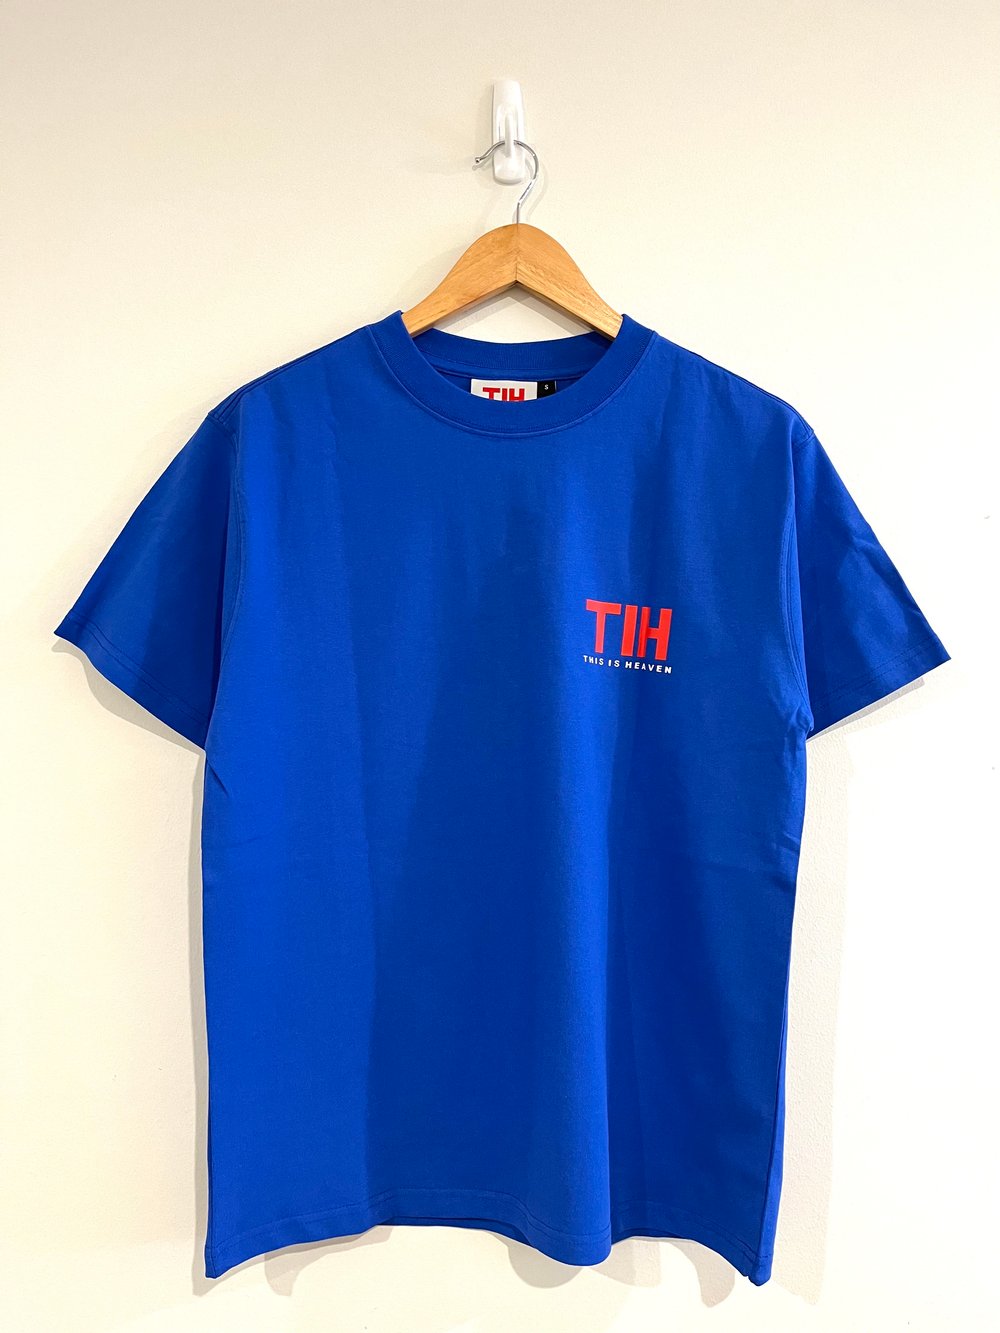 Image of THIS IS HEAVEN- LOGO TEE - BLUE